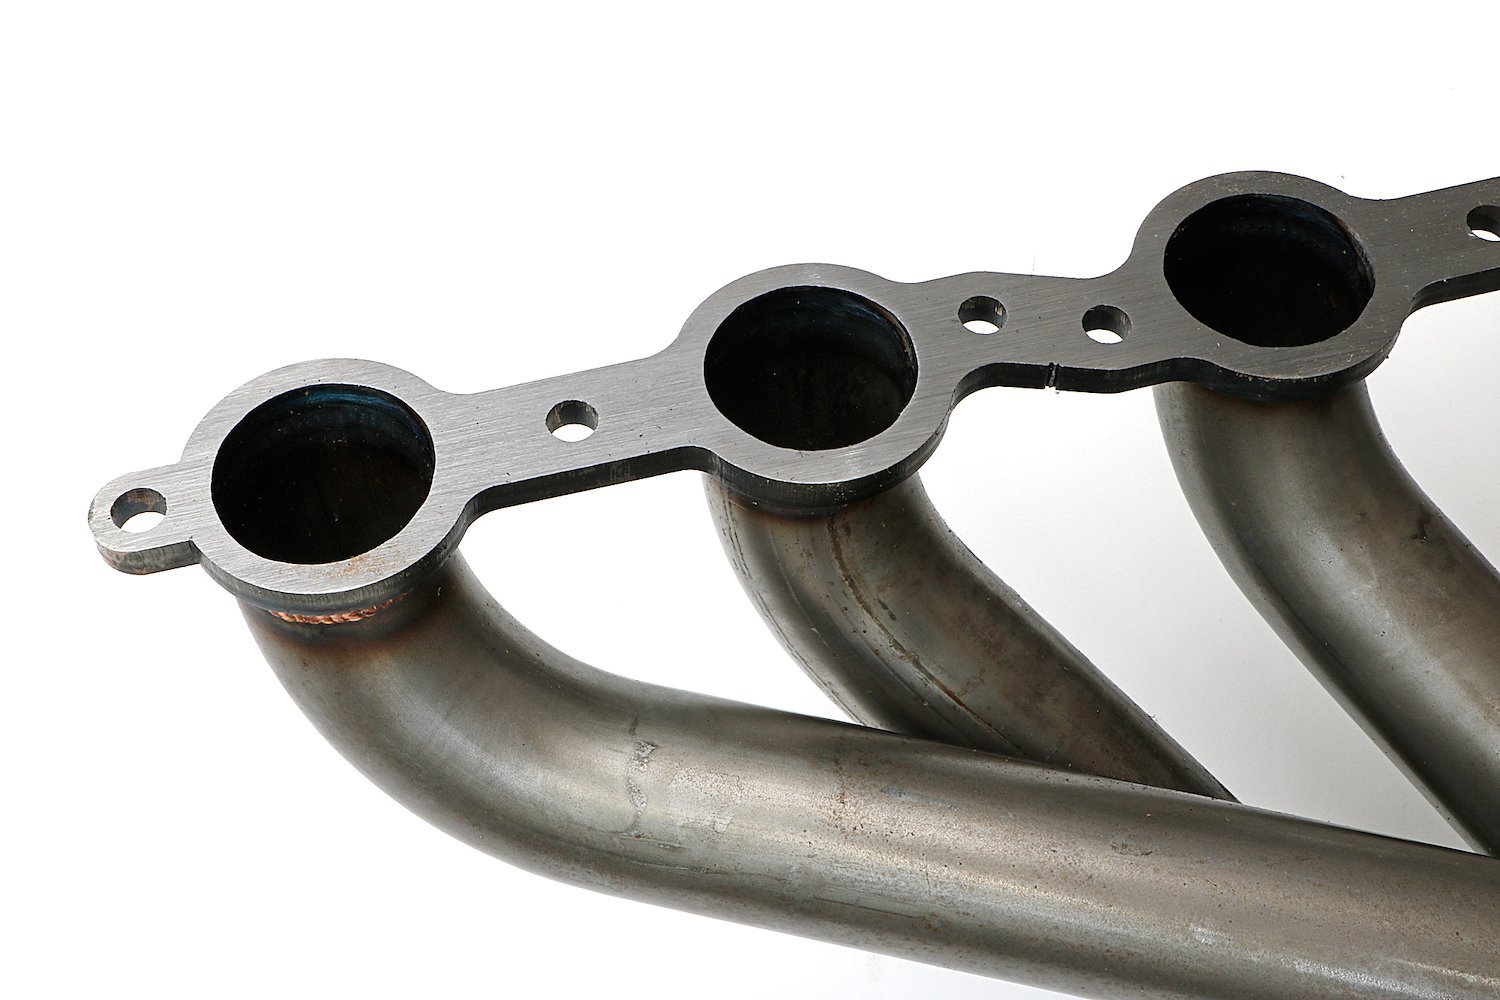 Long-Tube Headers Uncoated